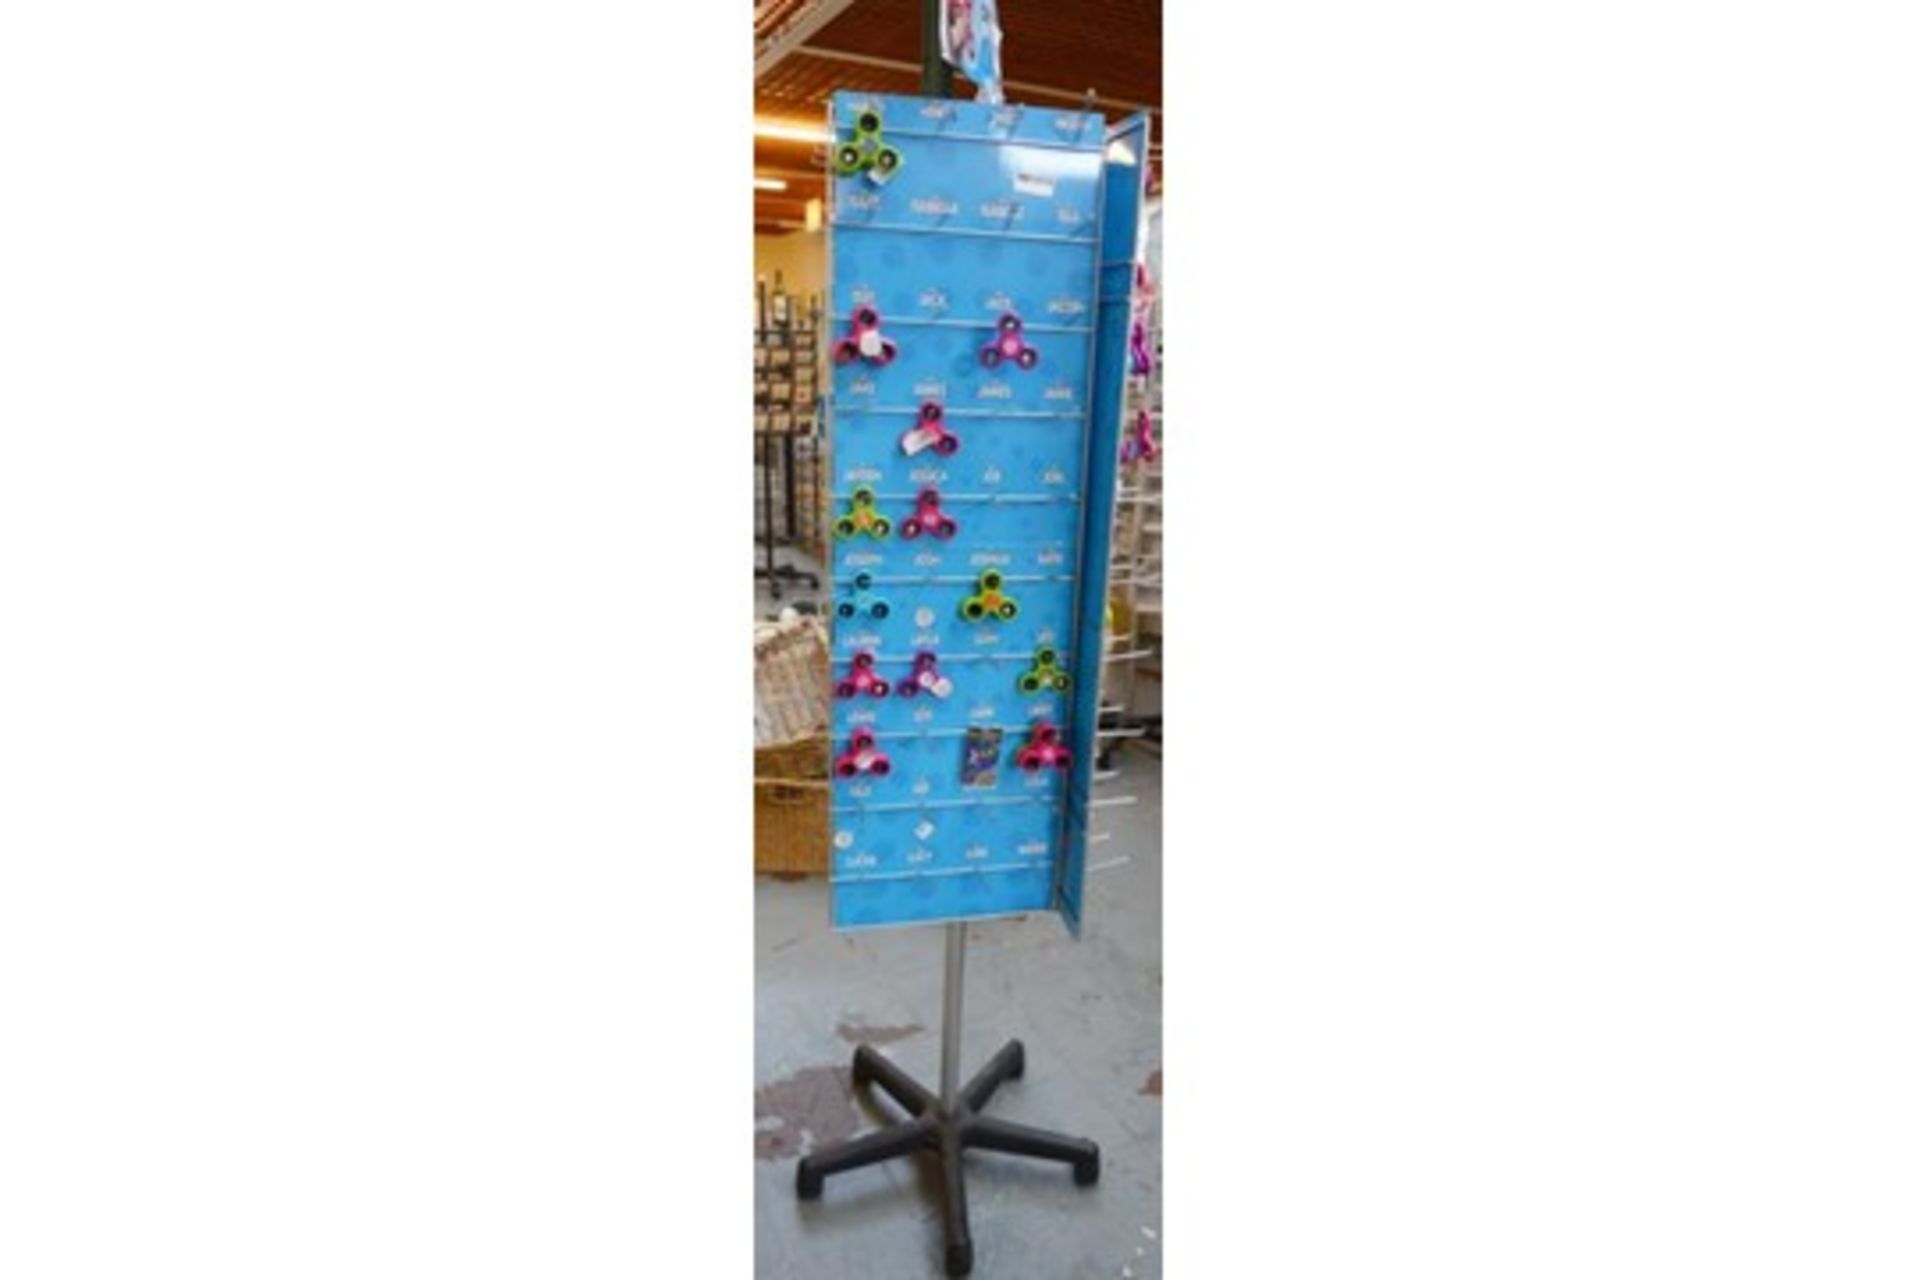 27 x Retail Carousel Display Stands With Approximately 2,800 Items of Resale Stock - Includes - Image 49 of 61